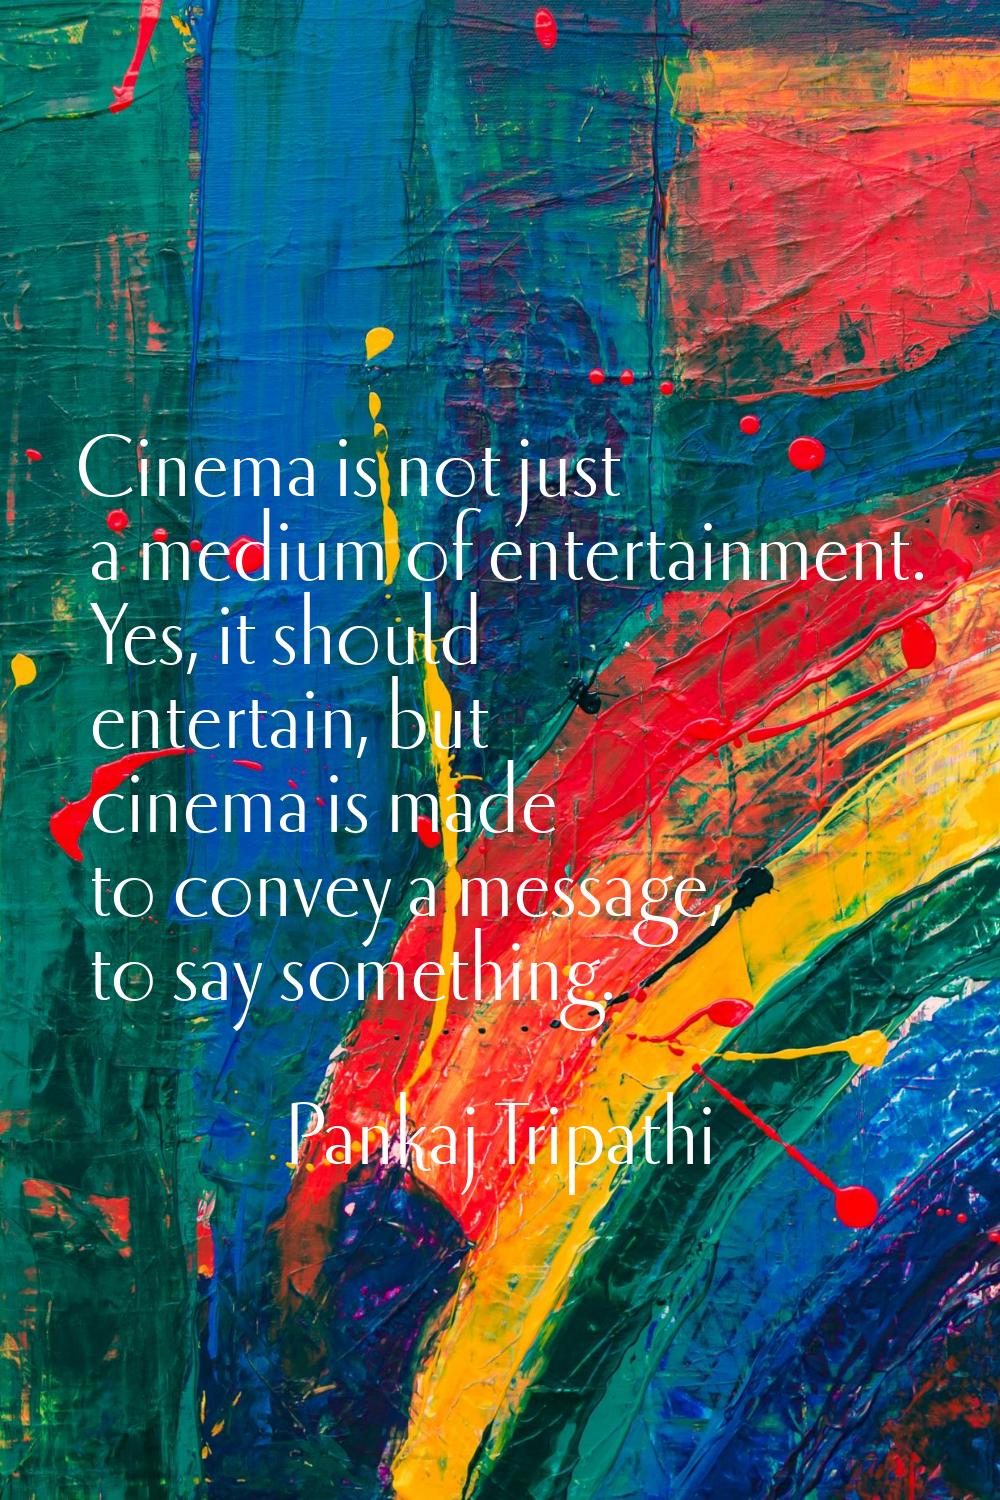 Cinema is not just a medium of entertainment. Yes, it should entertain, but cinema is made to conve